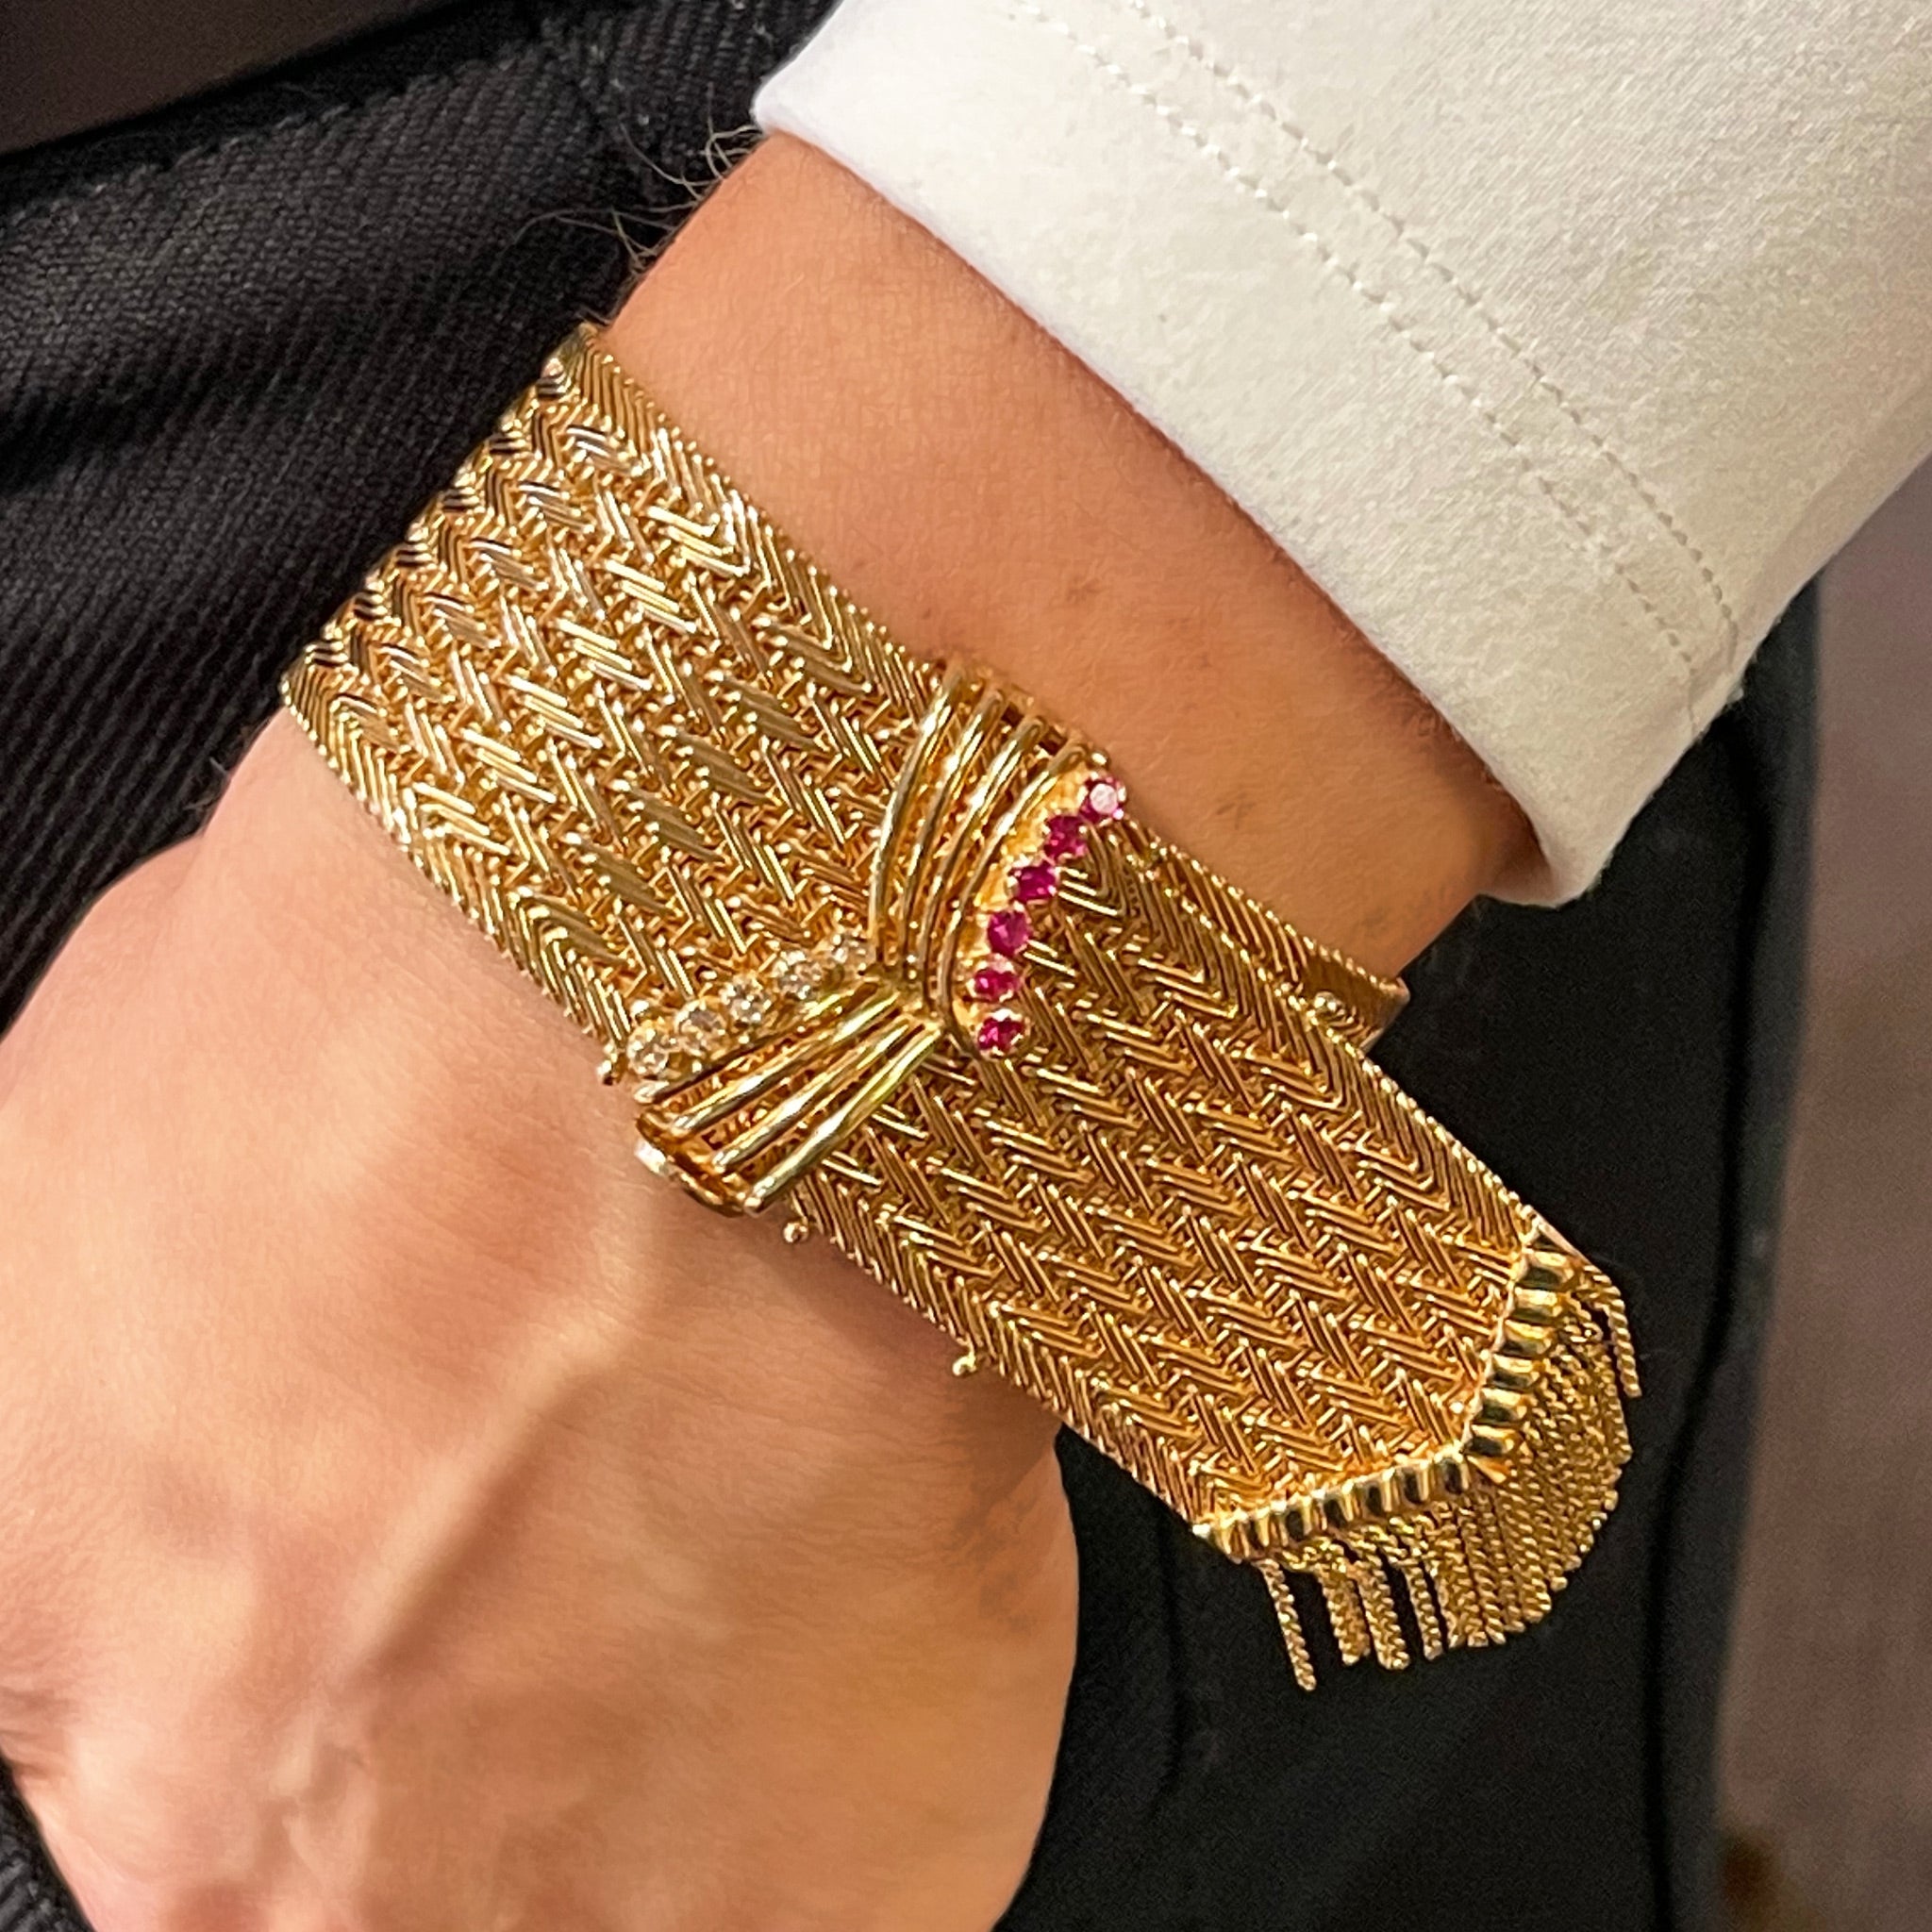 18k Rose Gold Mesh Bracelet with Ruby and Diamond Buckle Clasp